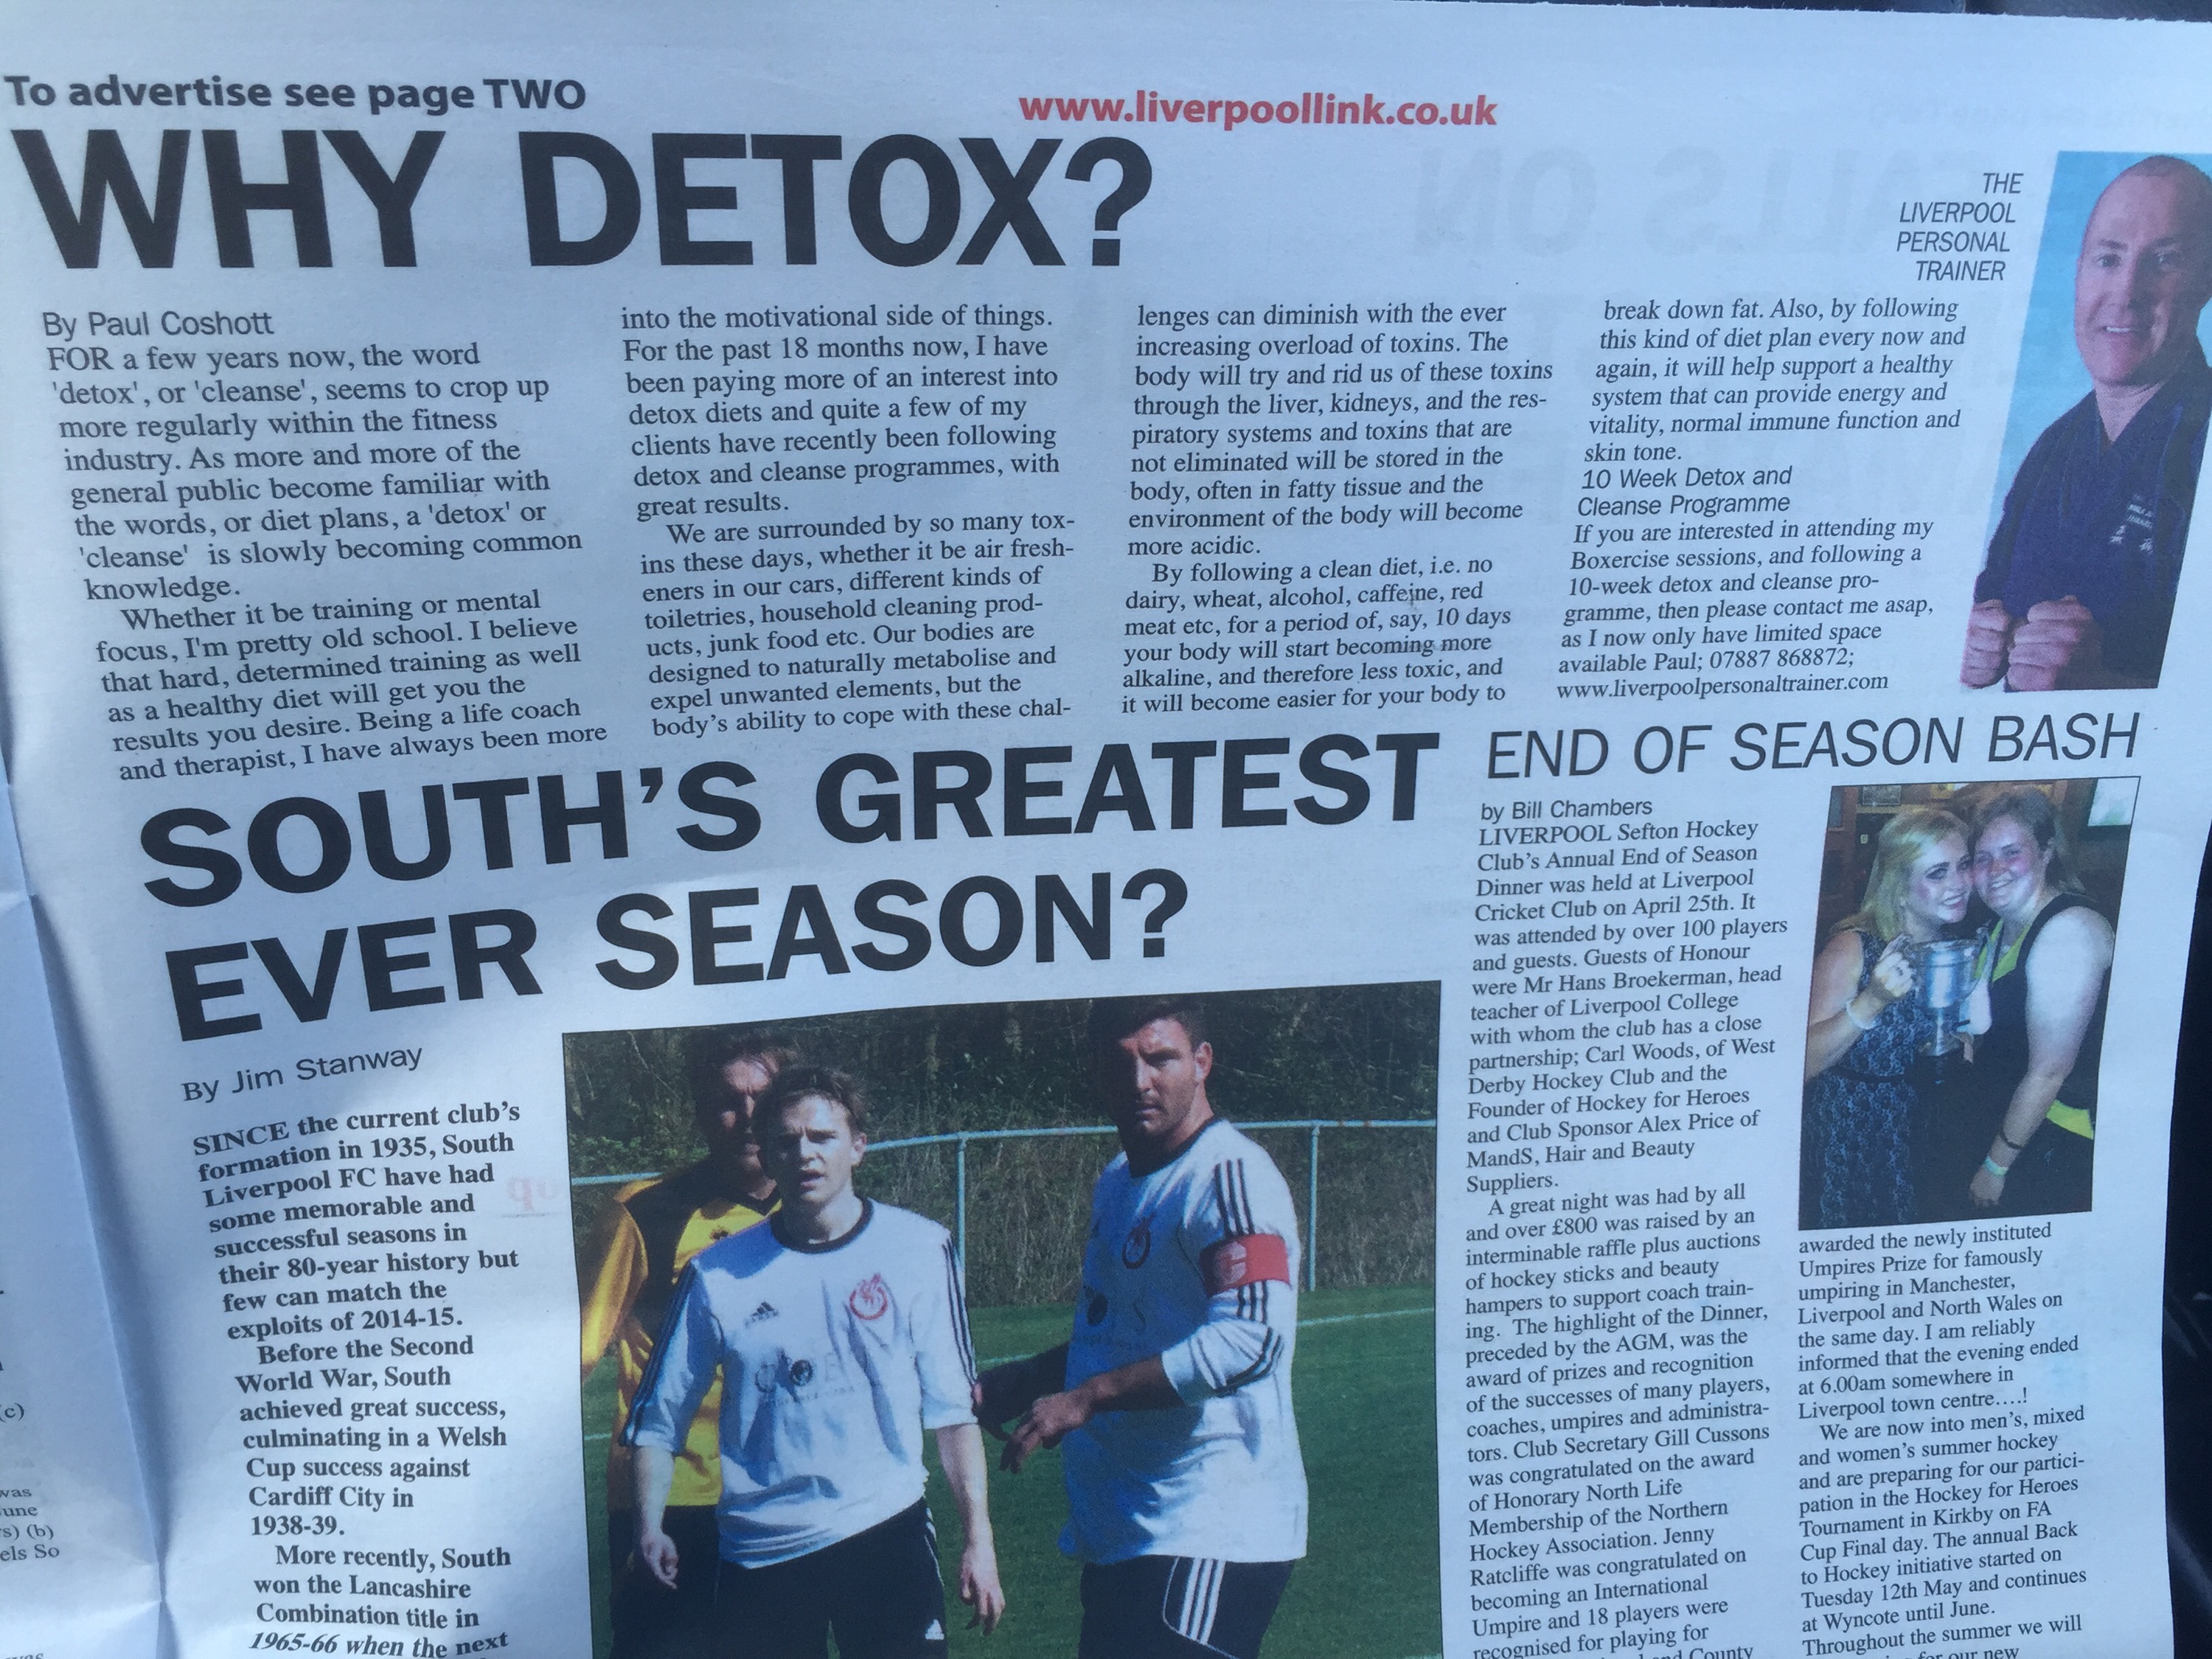 “why detox?” My latest article is out now in ‘The Link’ newspaper, North and South Liverpool 